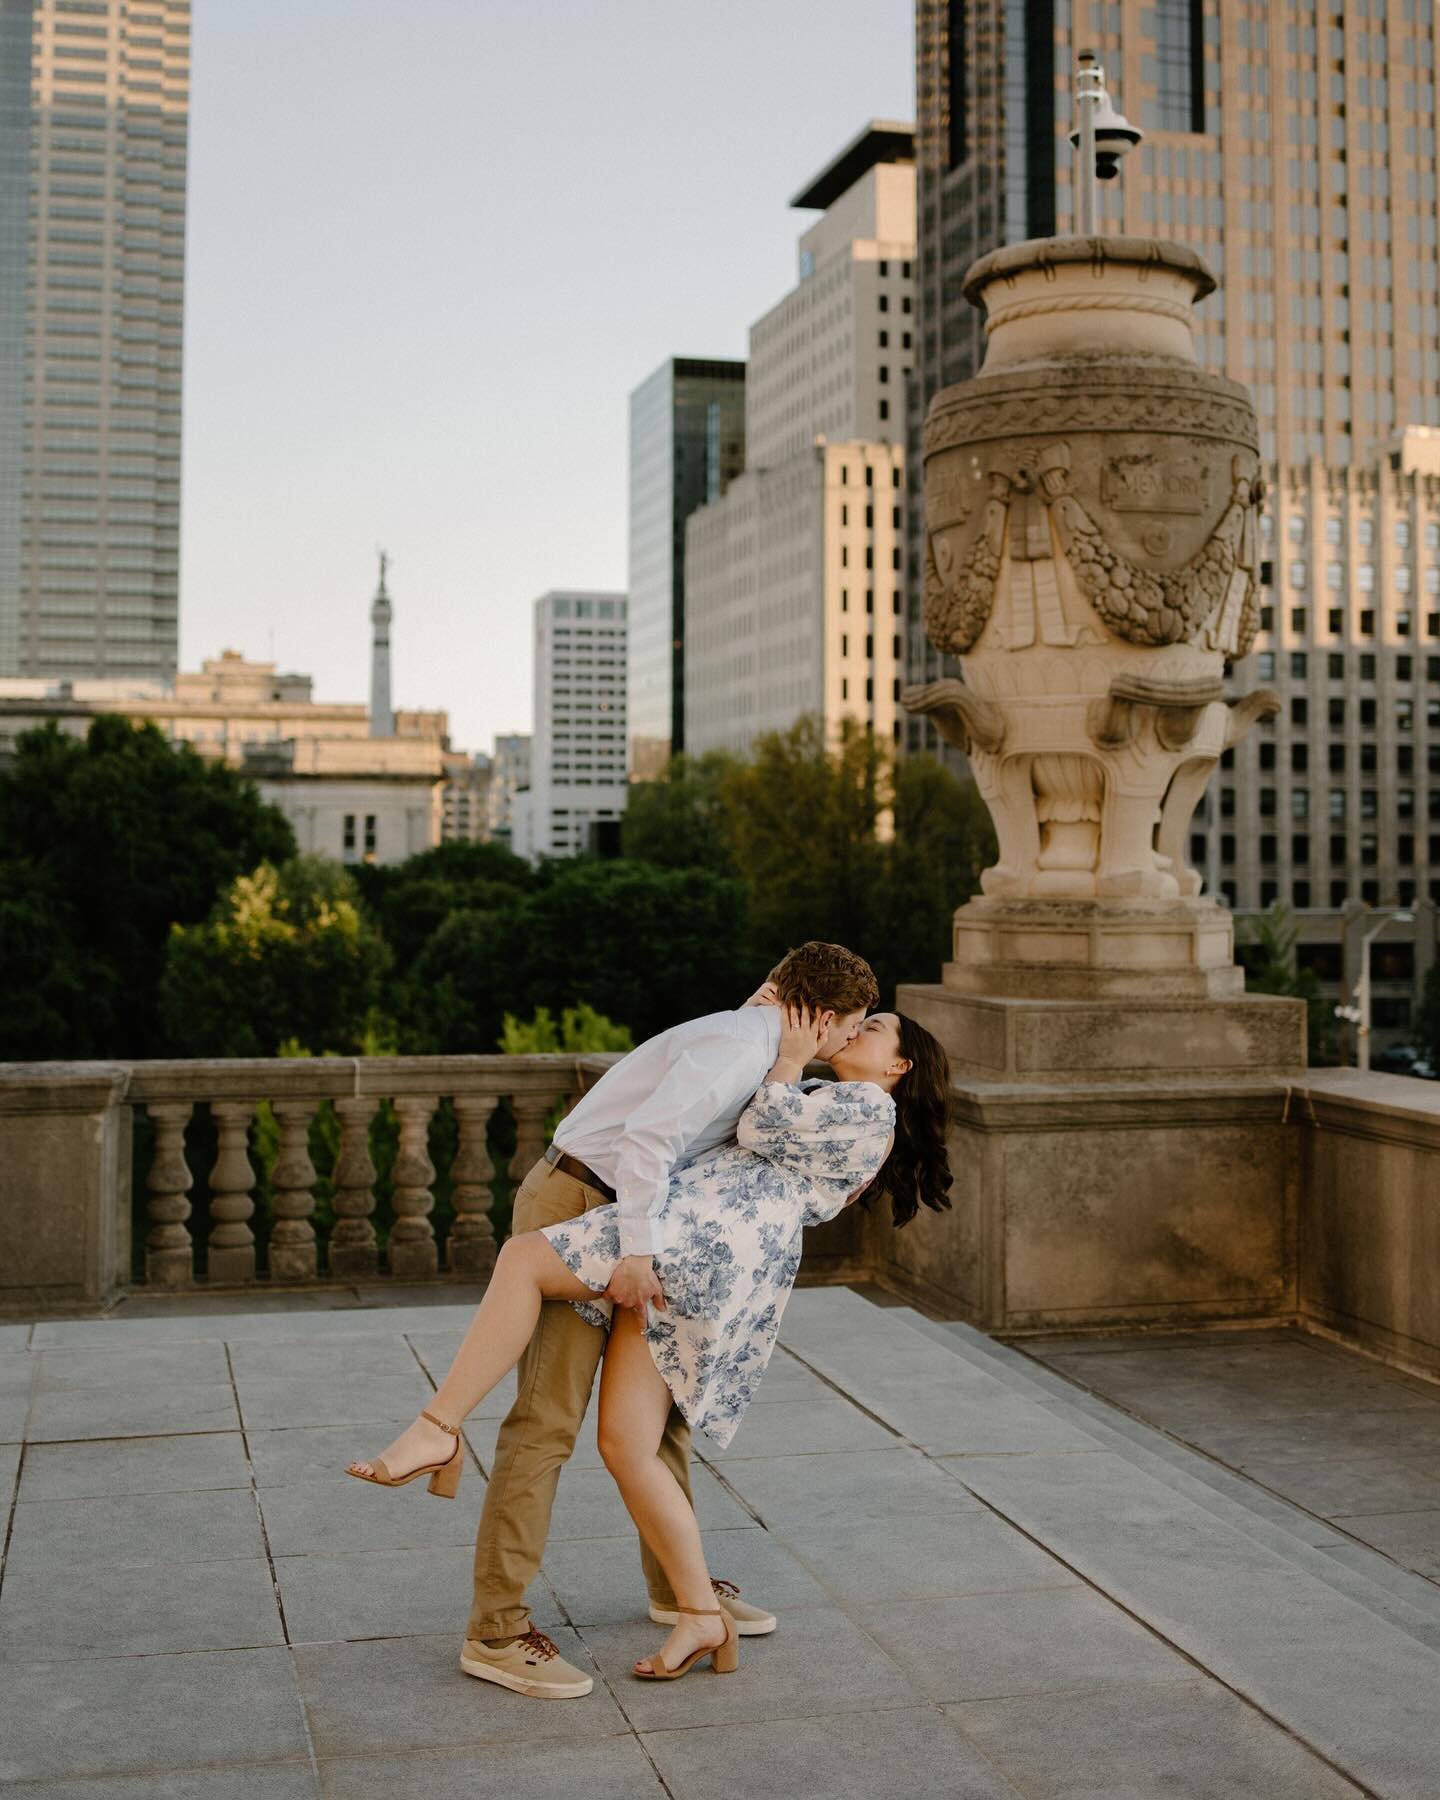 Downtown Indy with Nicole &amp; Jacob!

Jacob was a groomsman at a wedding I shot last fall &amp; I am so honored that they picked me to document their big day next spring! 

Our shoot happened to fall on the only day it didn&rsquo;t rain this week s